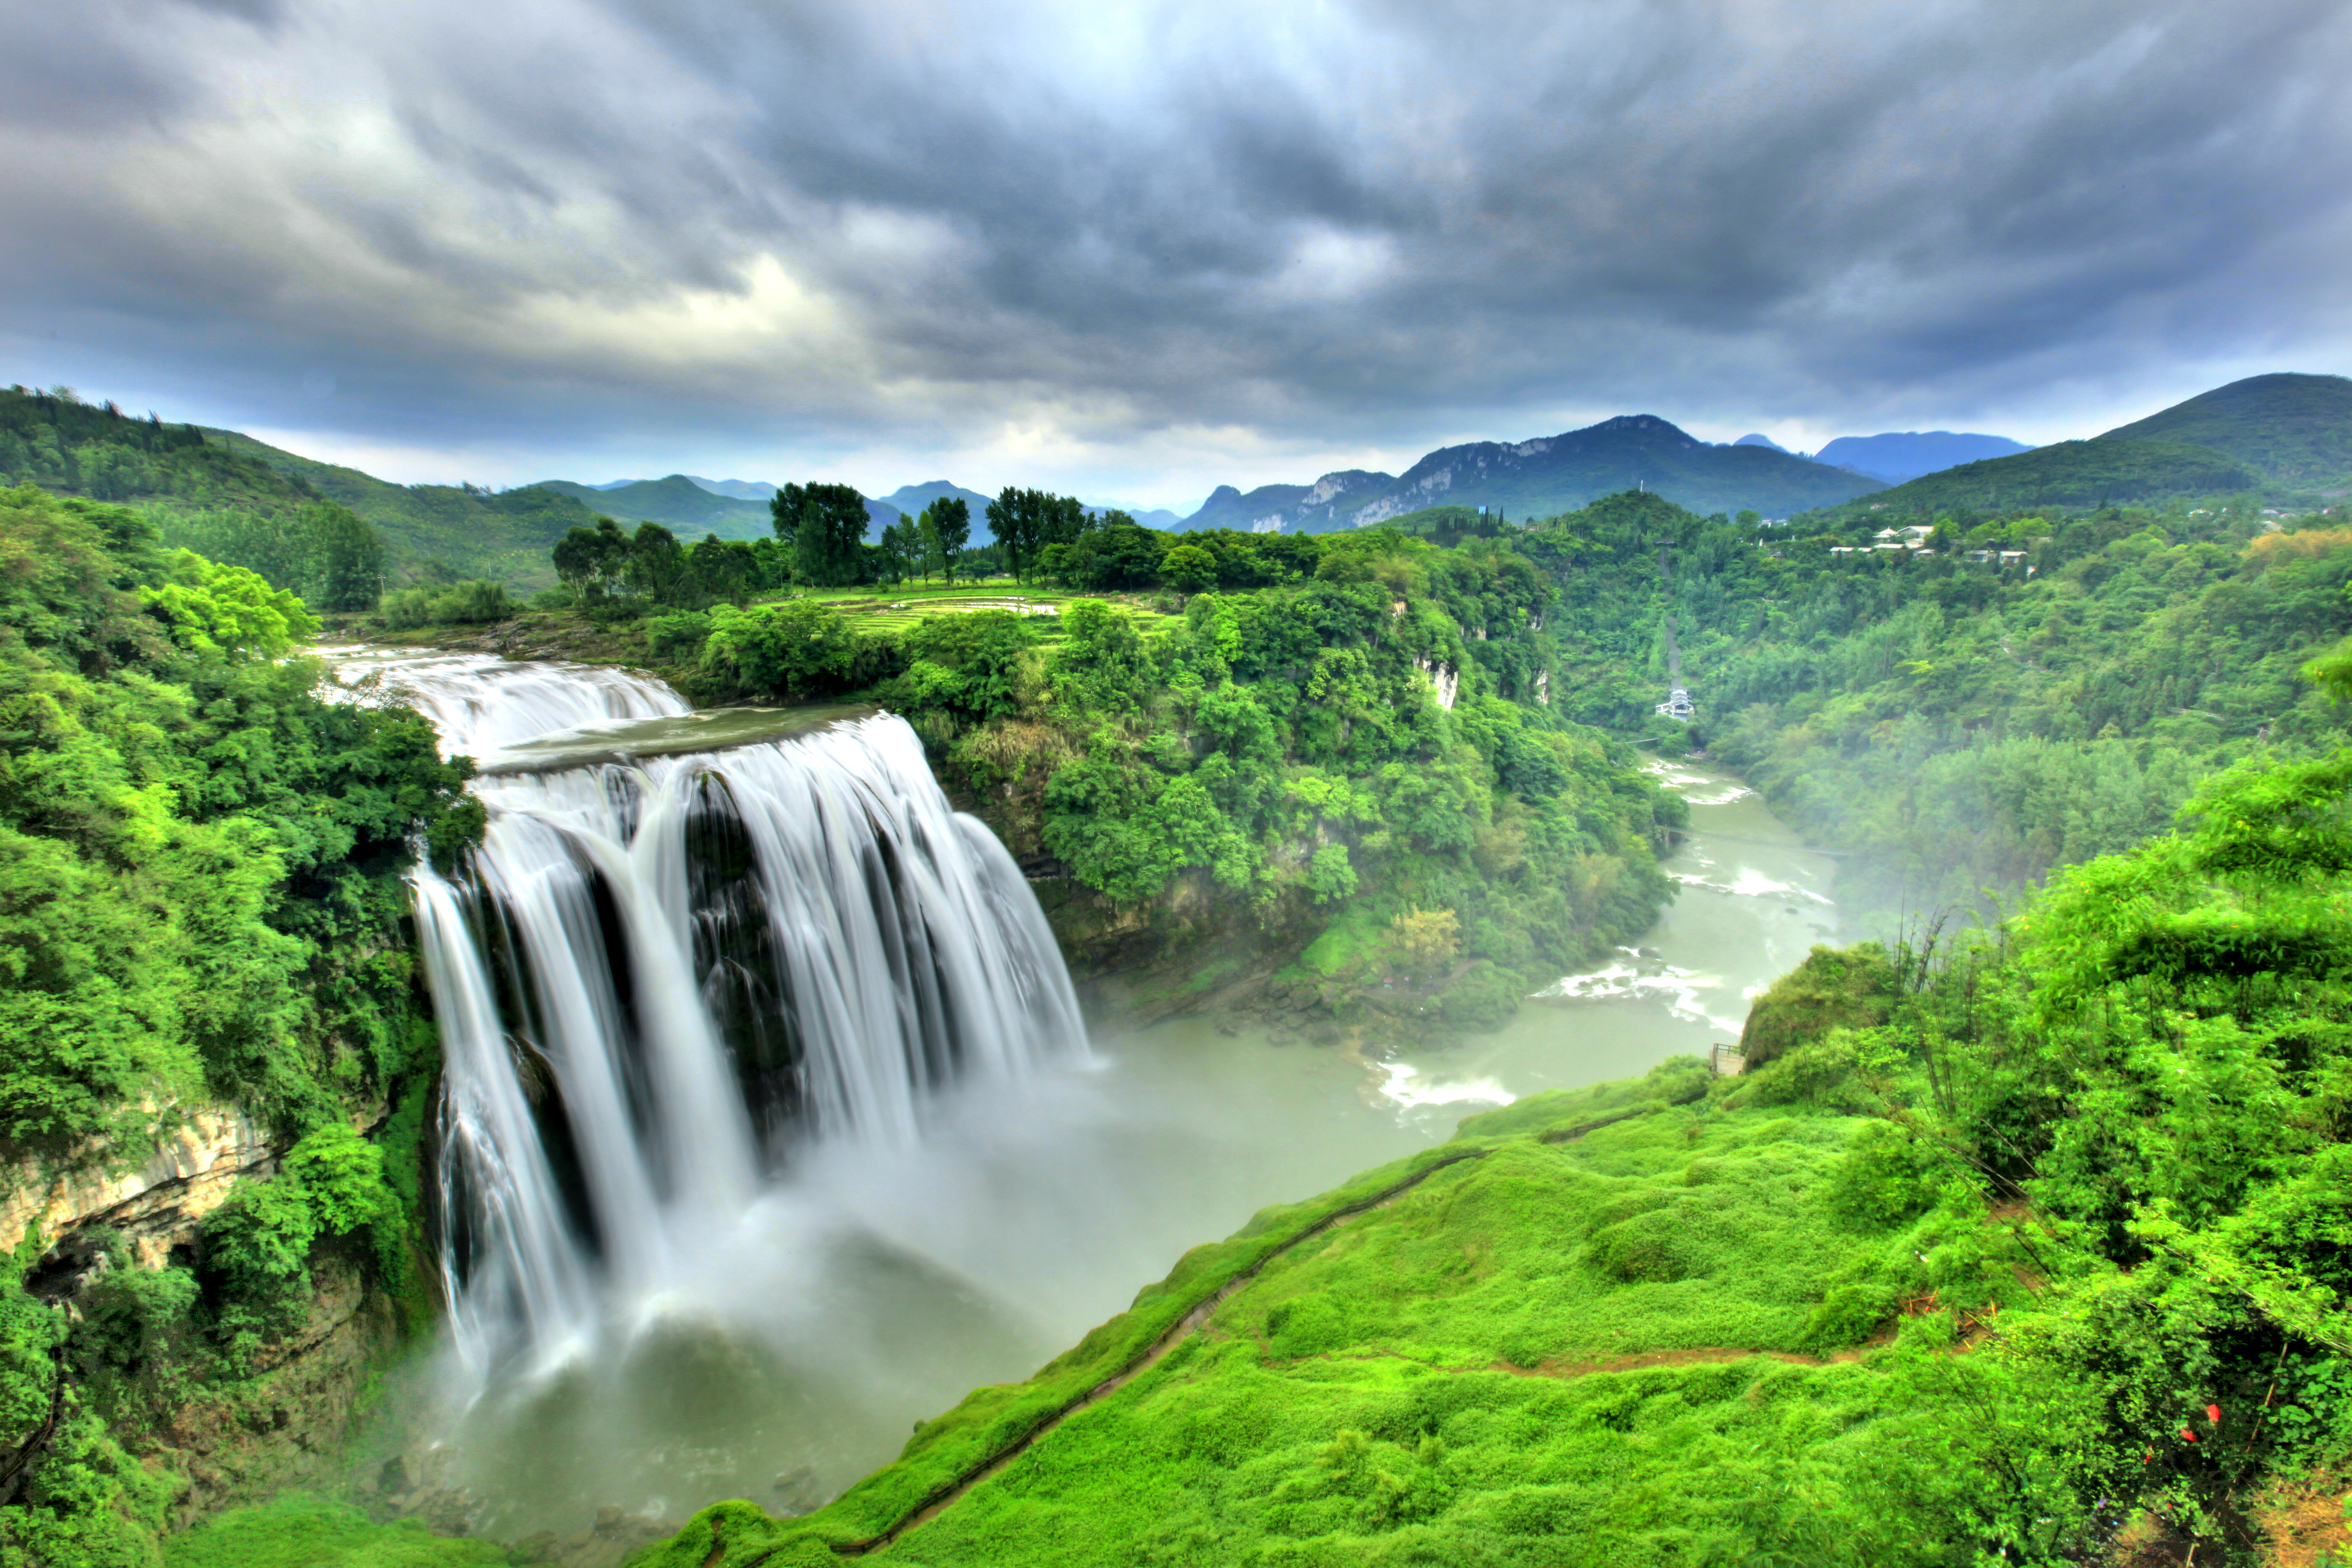 Undated photo shows the view of the Huangguoshu Waterfall in Anshun, Guizhou Province. /Photo Provided to CGTN